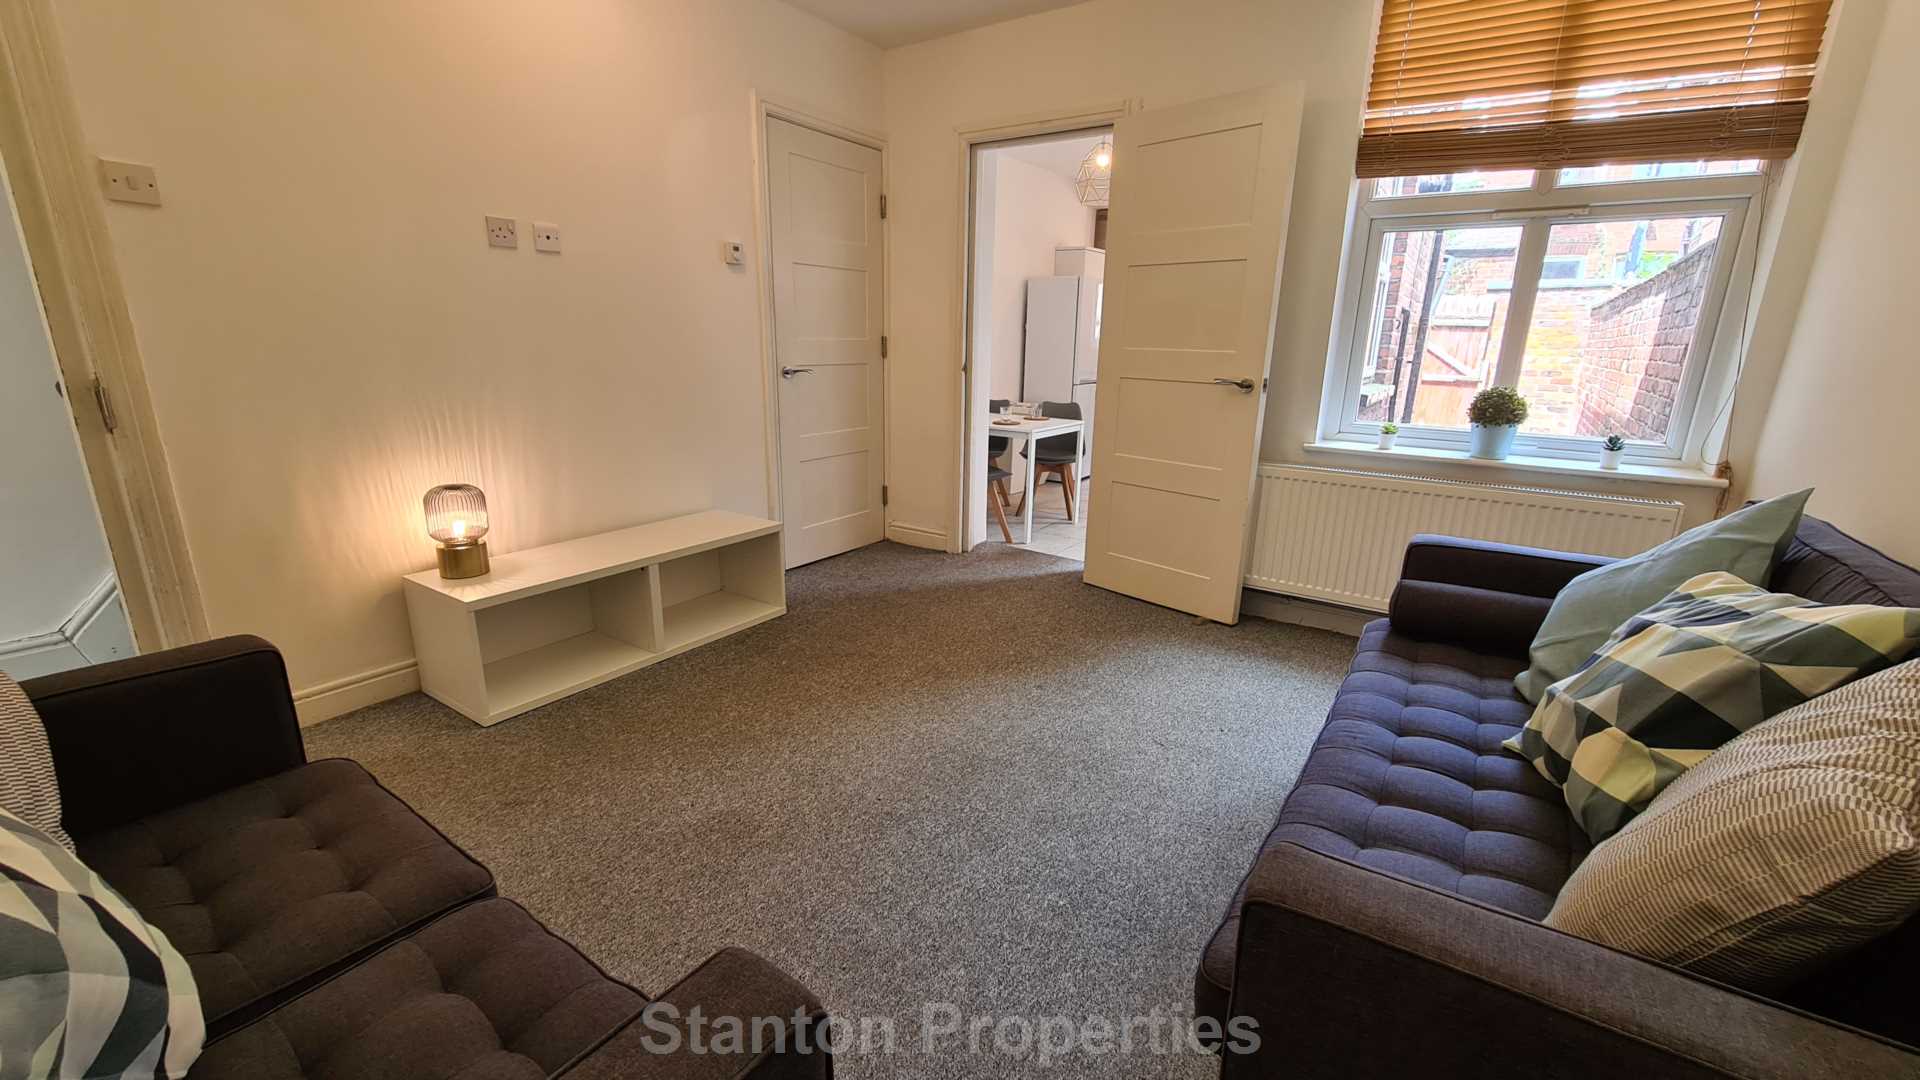 £136 pppw, See Video Tour, Furness Road, Fallowfield, Image 6